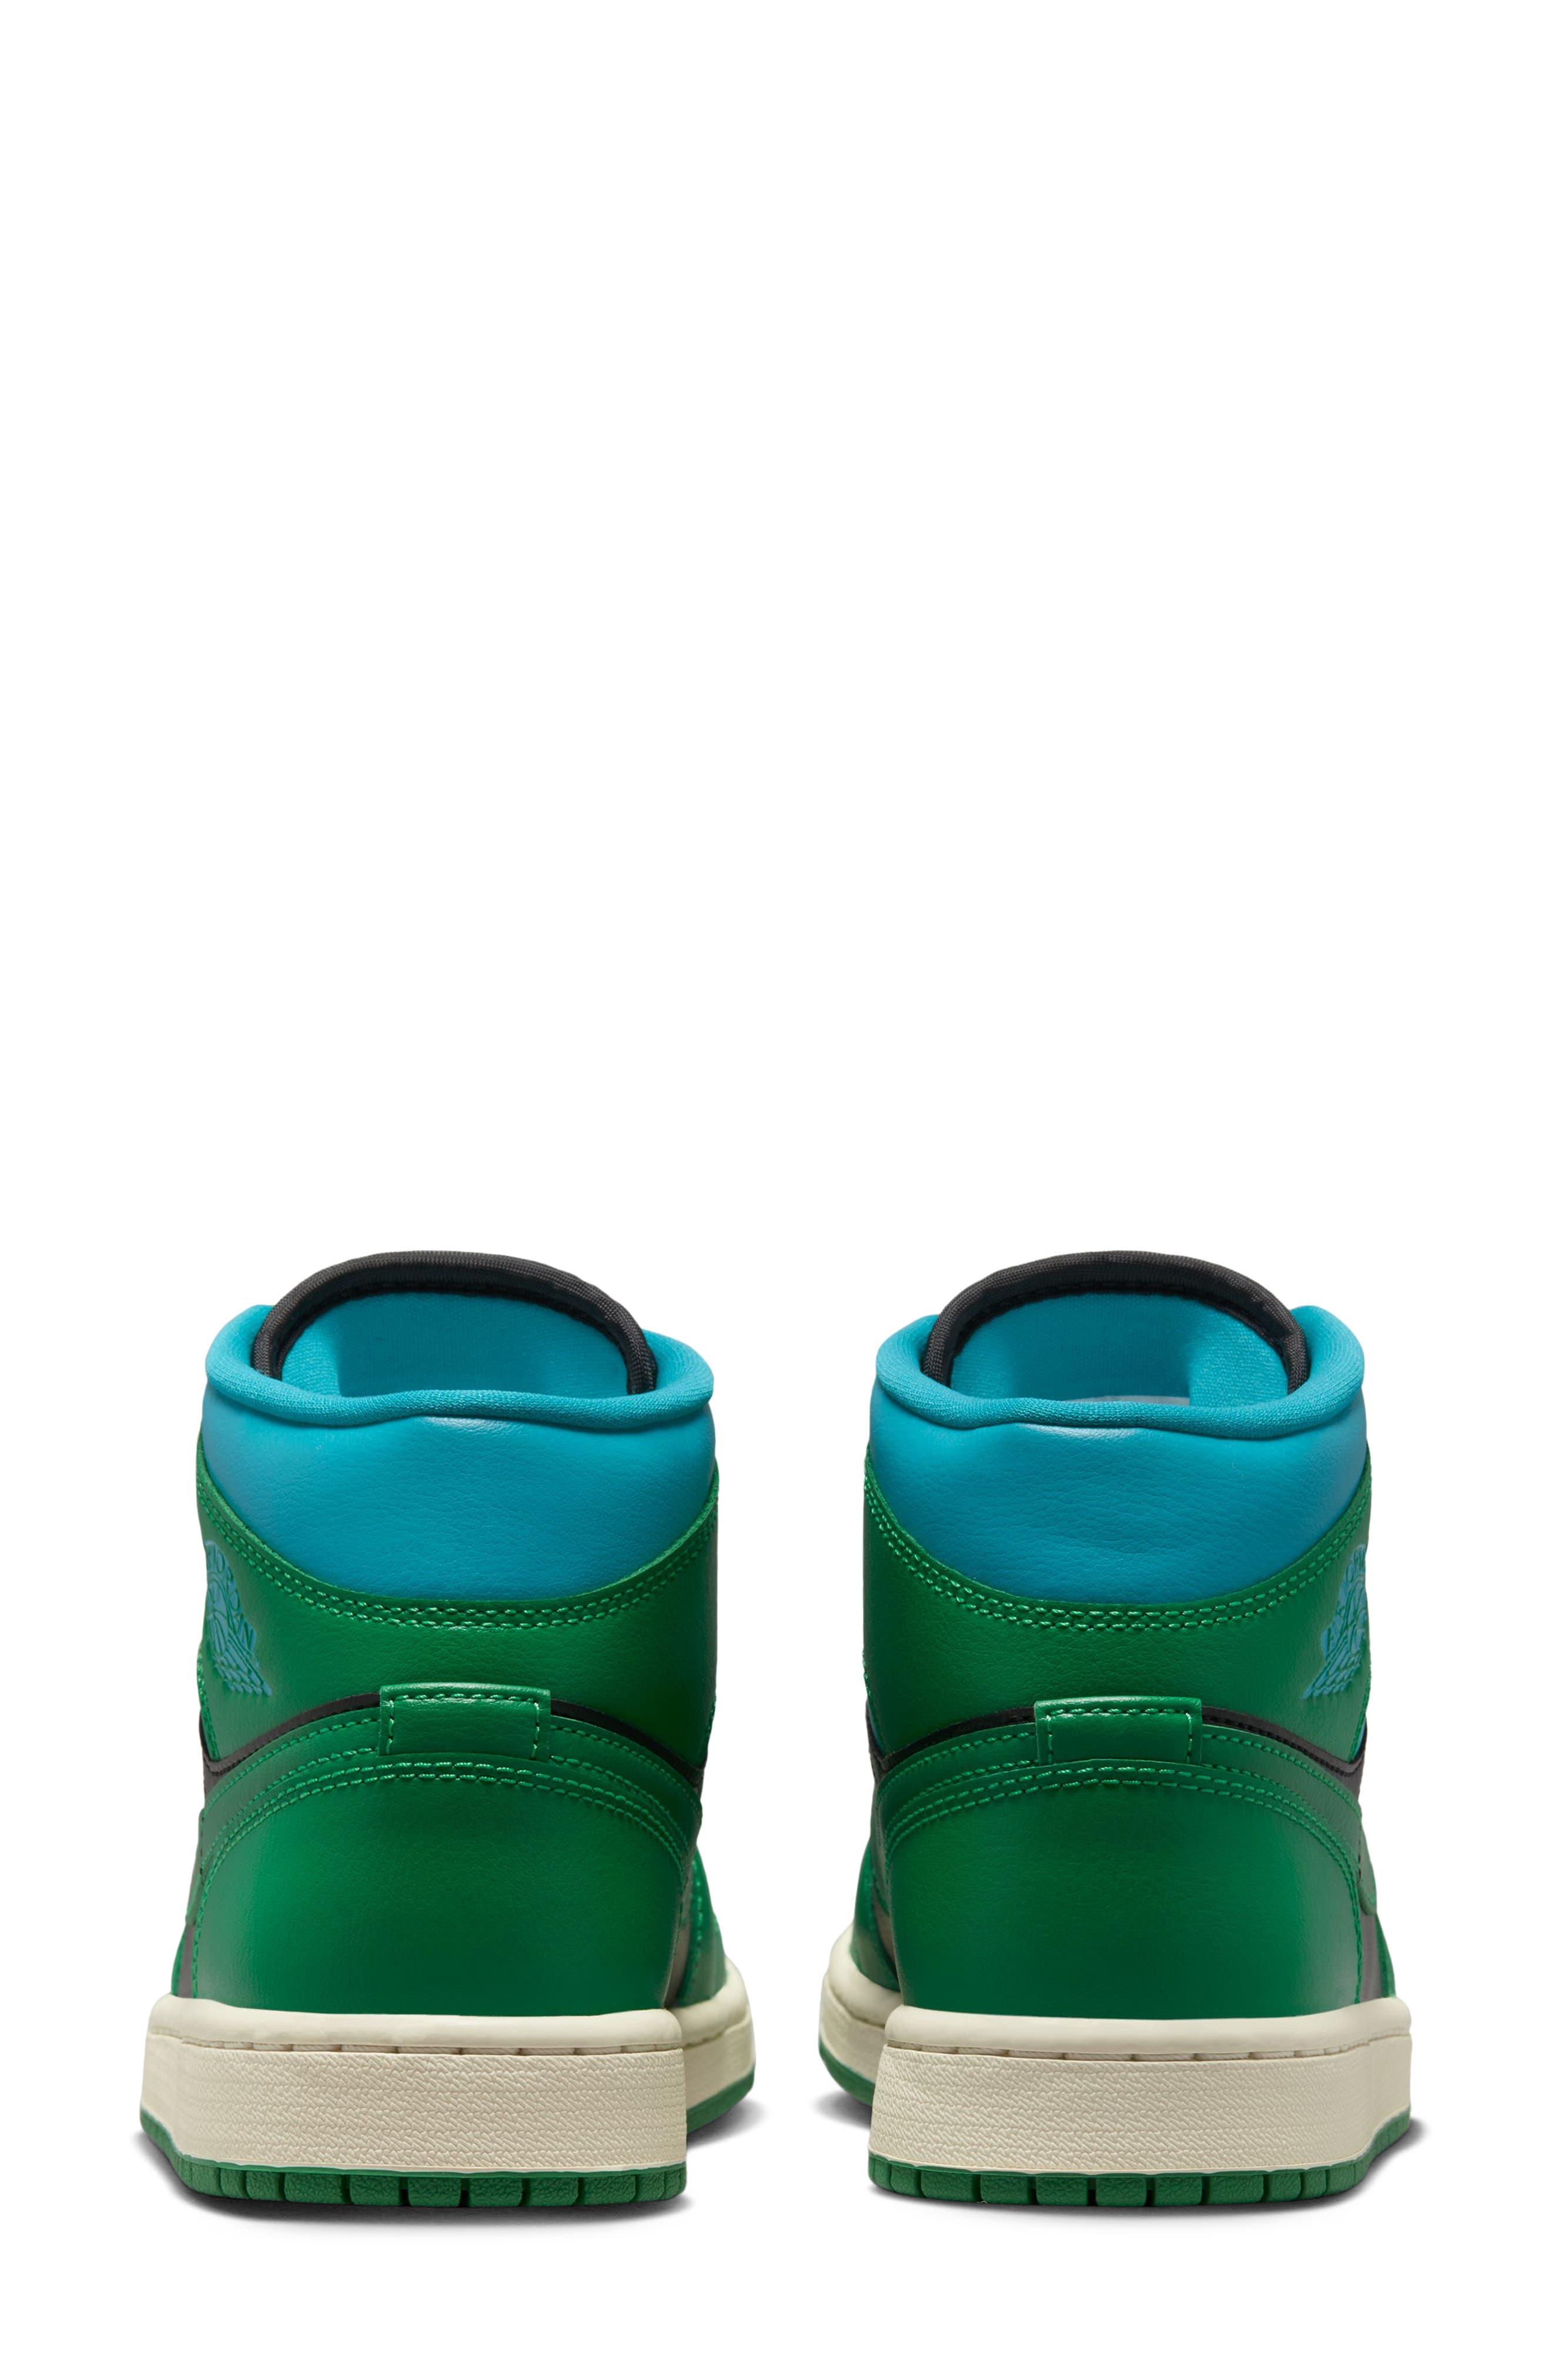 Nike Air Jordan 1 Mid Leather Mid-top Trainers in Green | Lyst